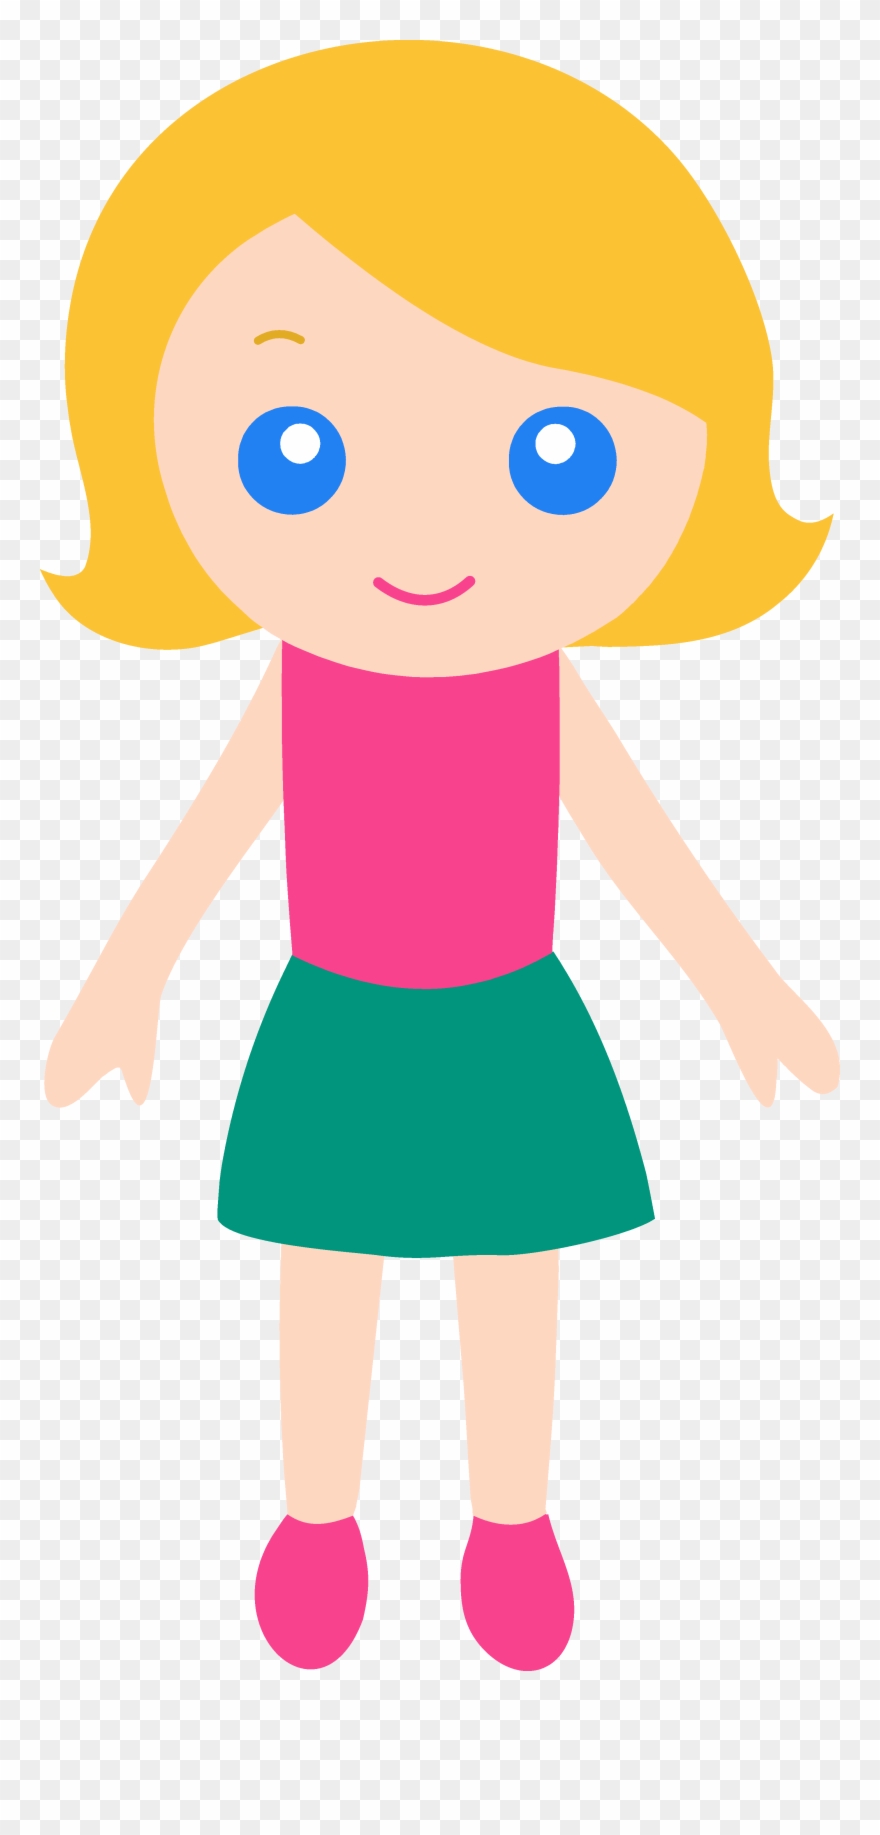 Women girl with blonde. Young clipart cartoon